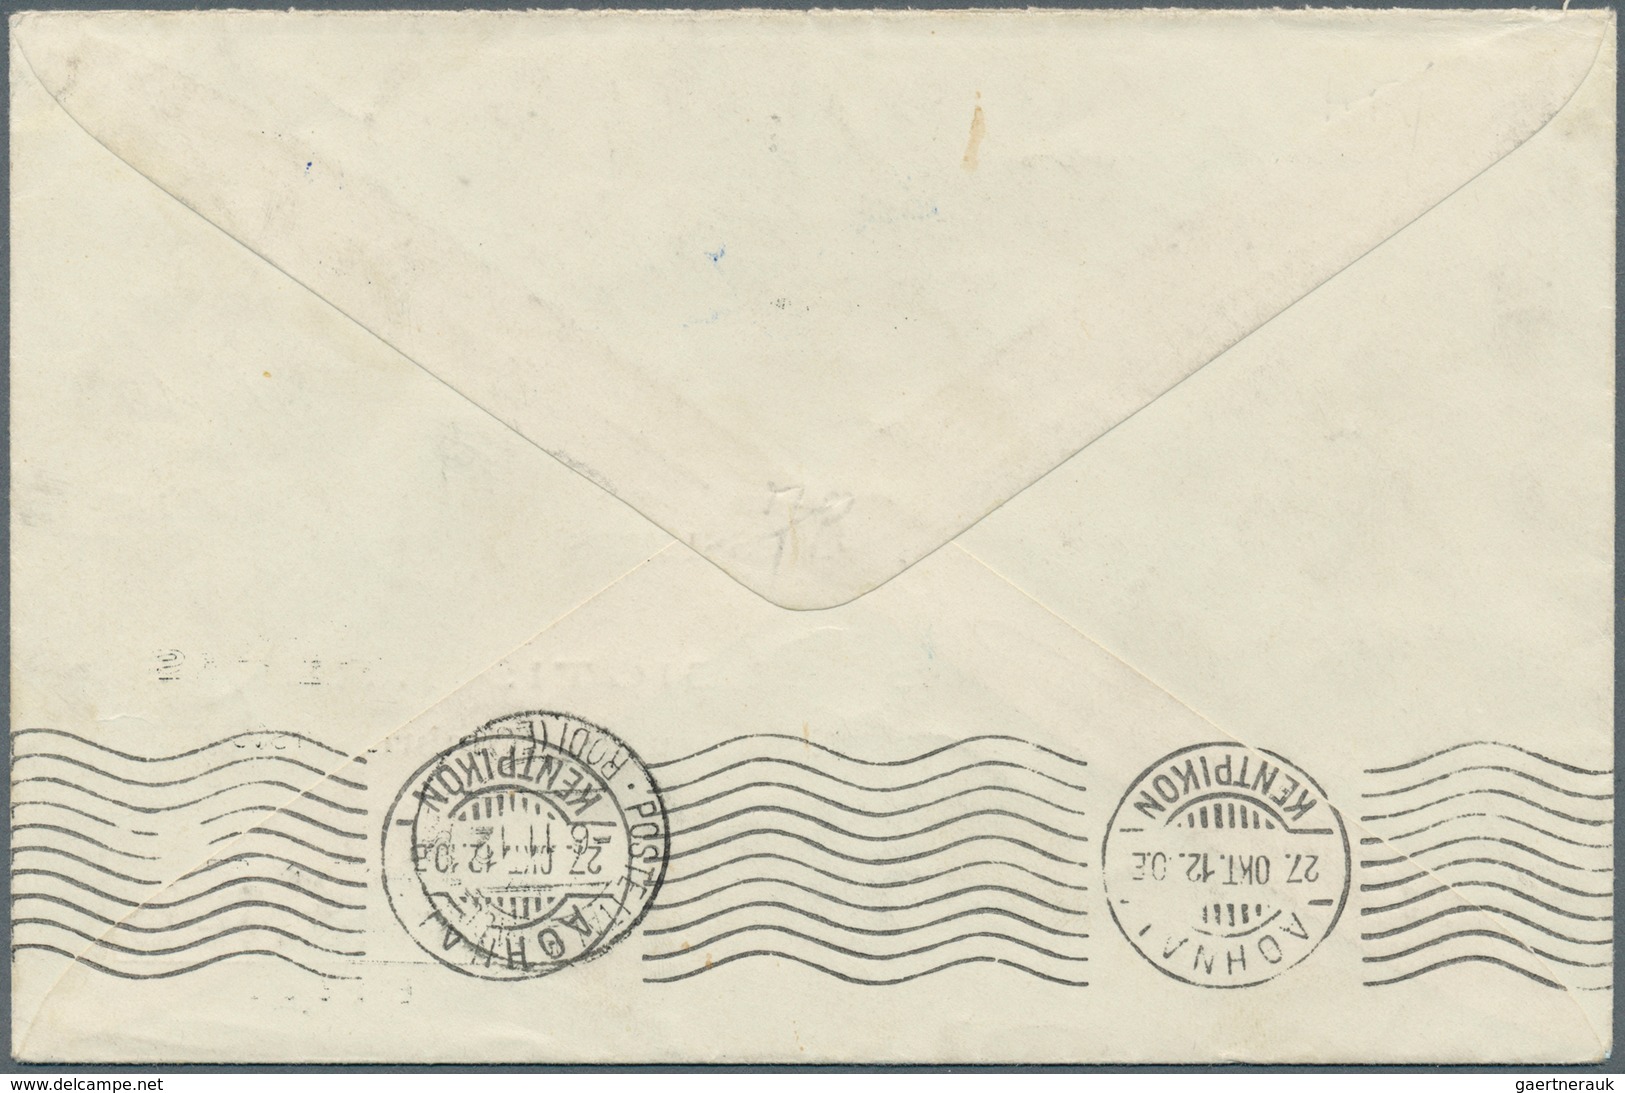 Italien: 1871/1949, Italy/Area, group of six better entires, e.g. 1871 registered cover, 1933 Vatica